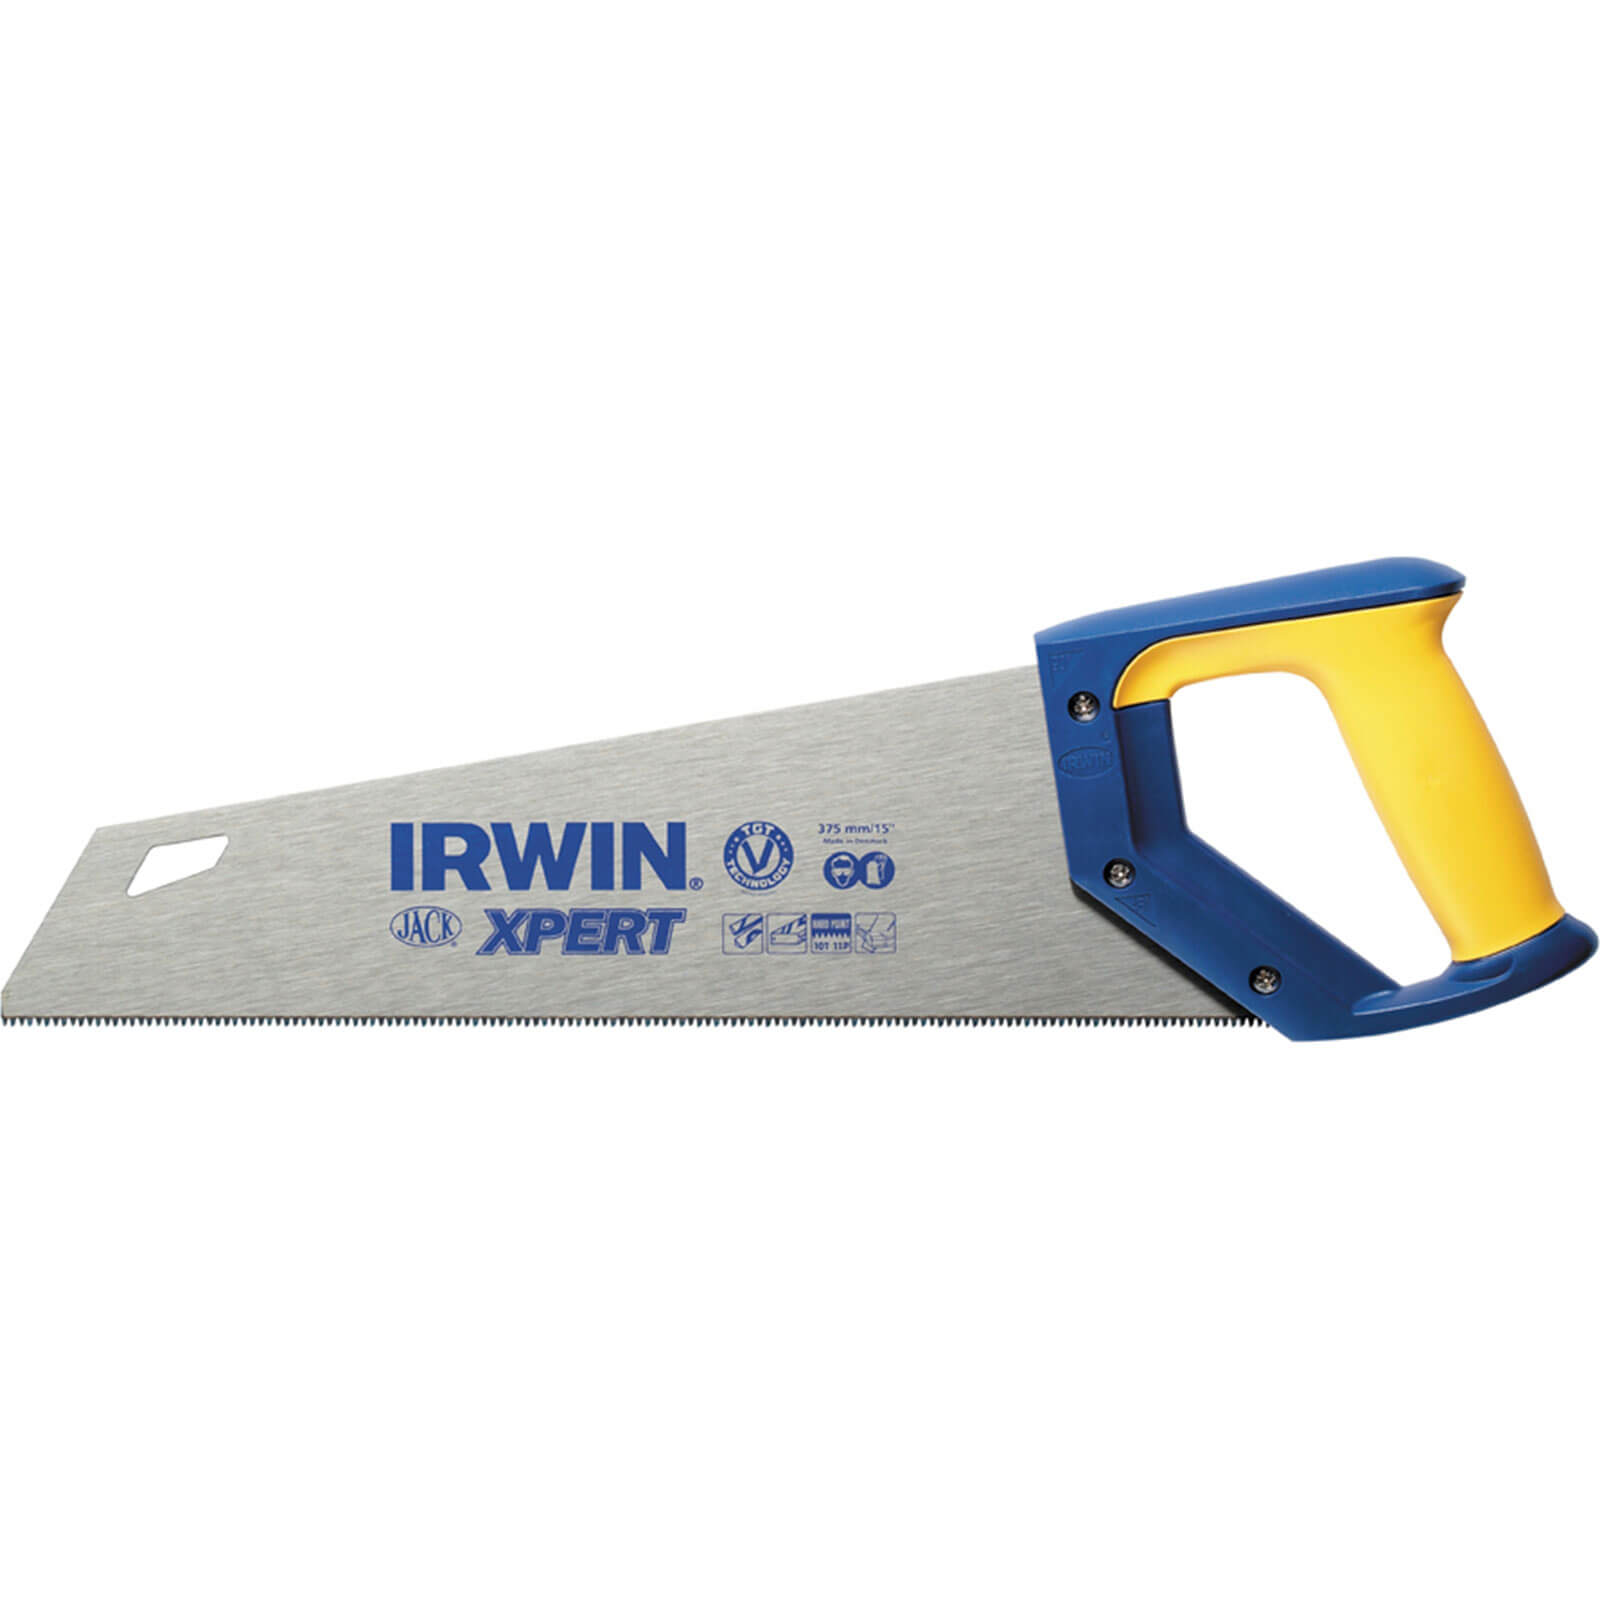 Image of Jack Xpert Universal Hand Saw 15" / 390mm 8tpi